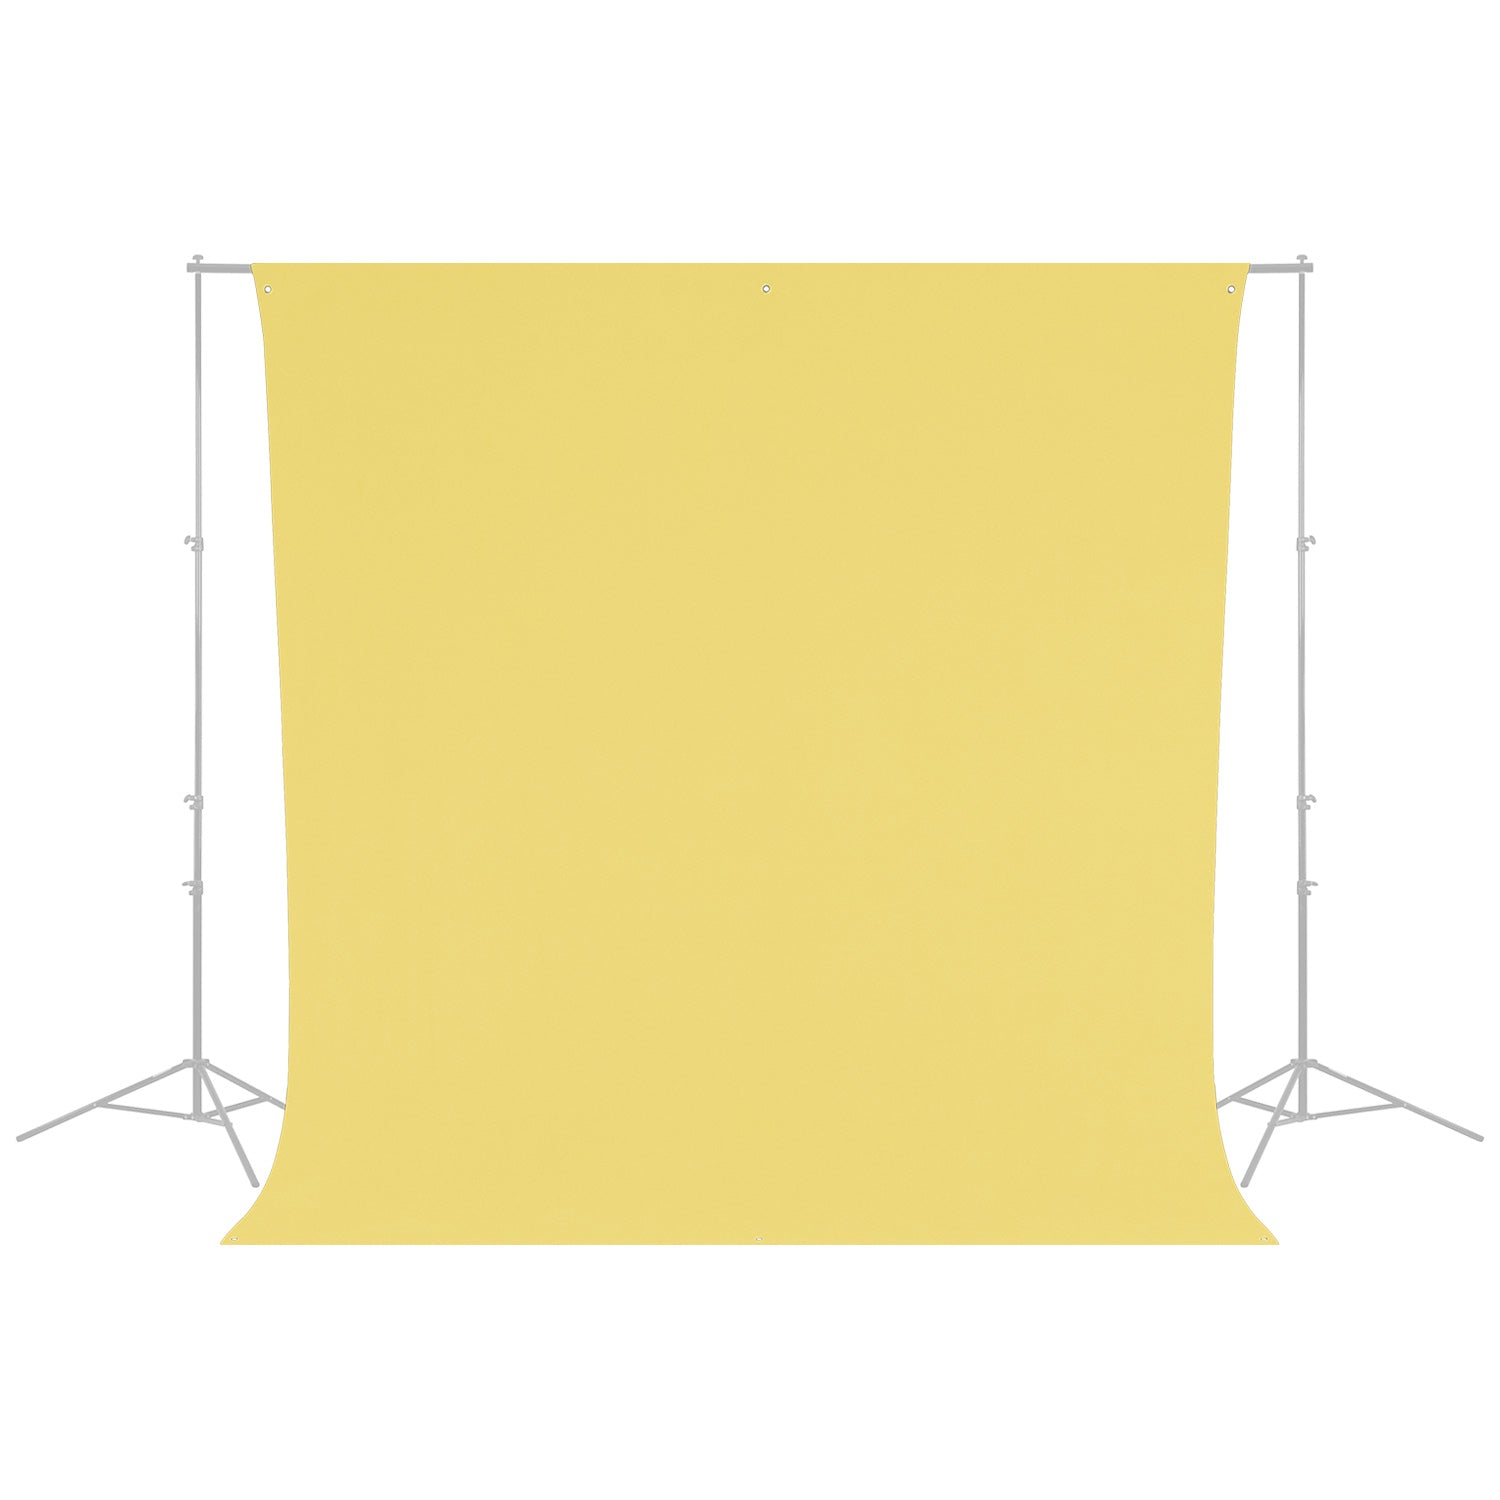 Wrinkle-Resistant Backdrop - Canary Yellow (9' x 10')